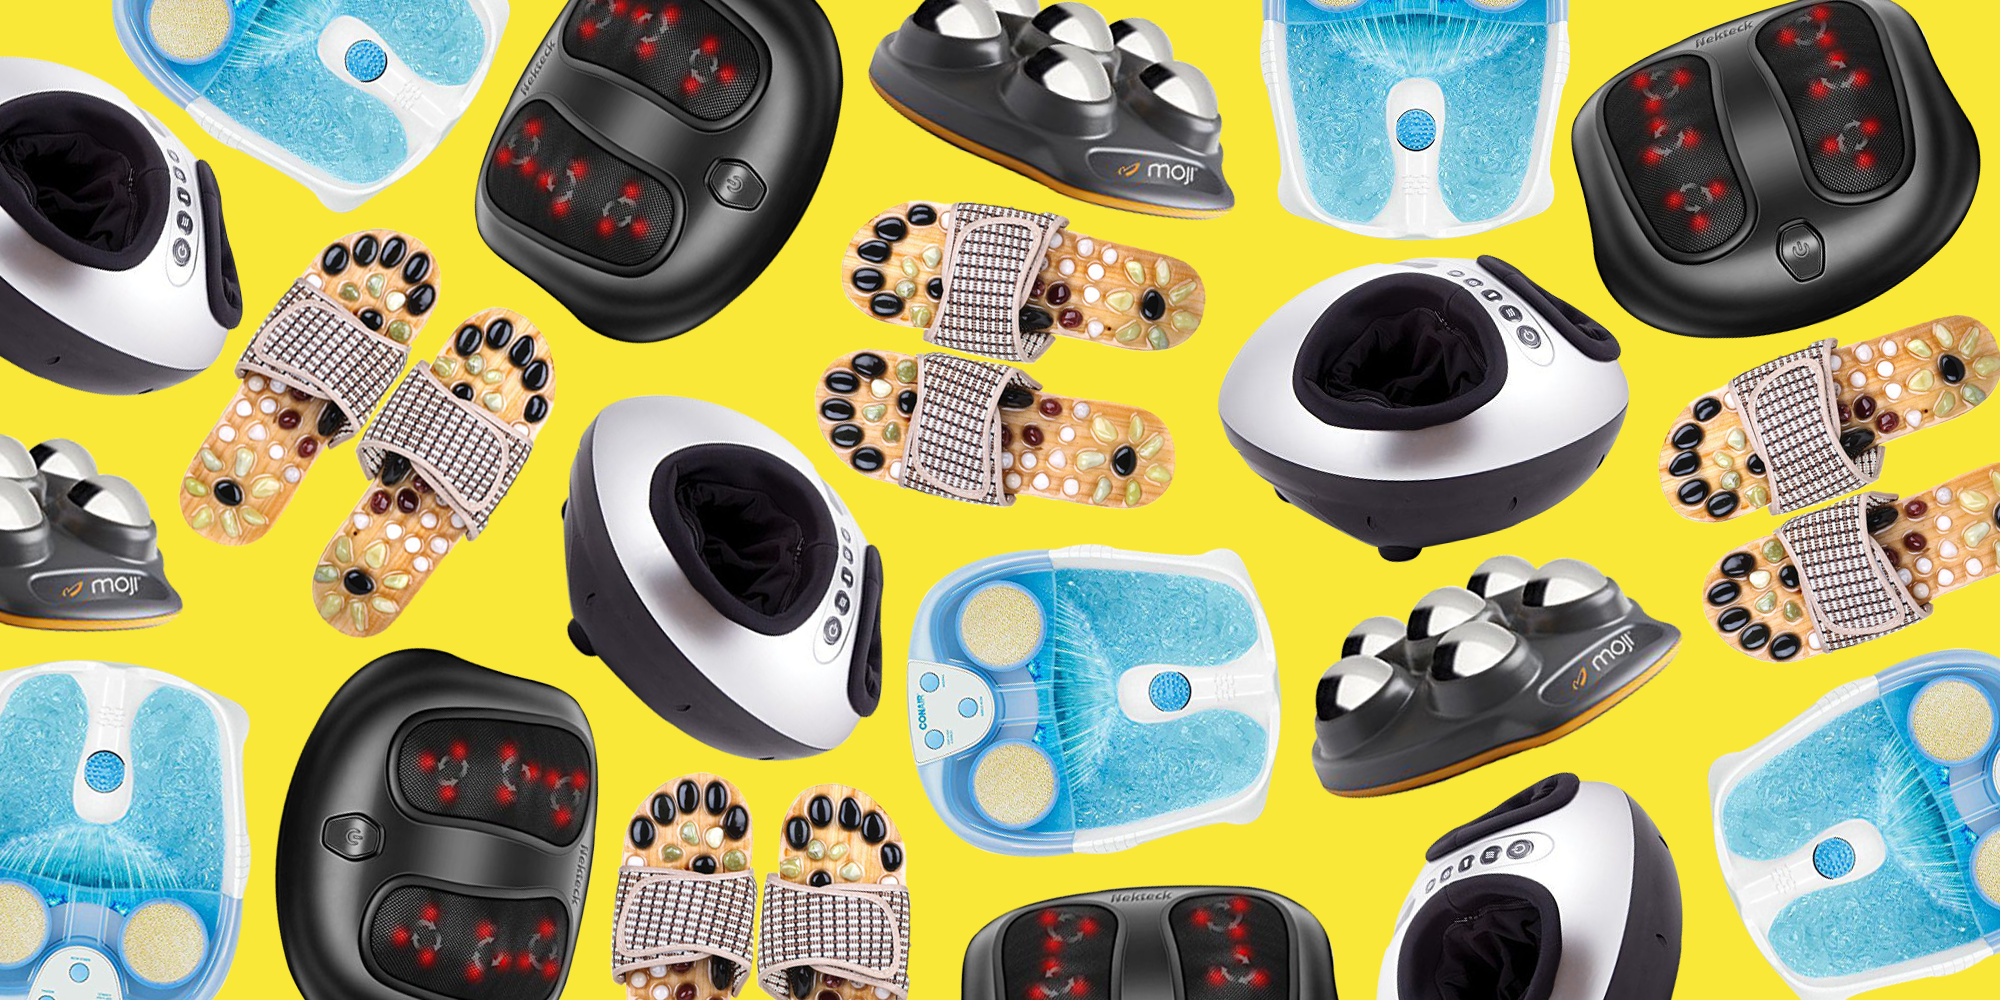 Best Foot Massagers of 2023: 7 Top Picks According to Experts